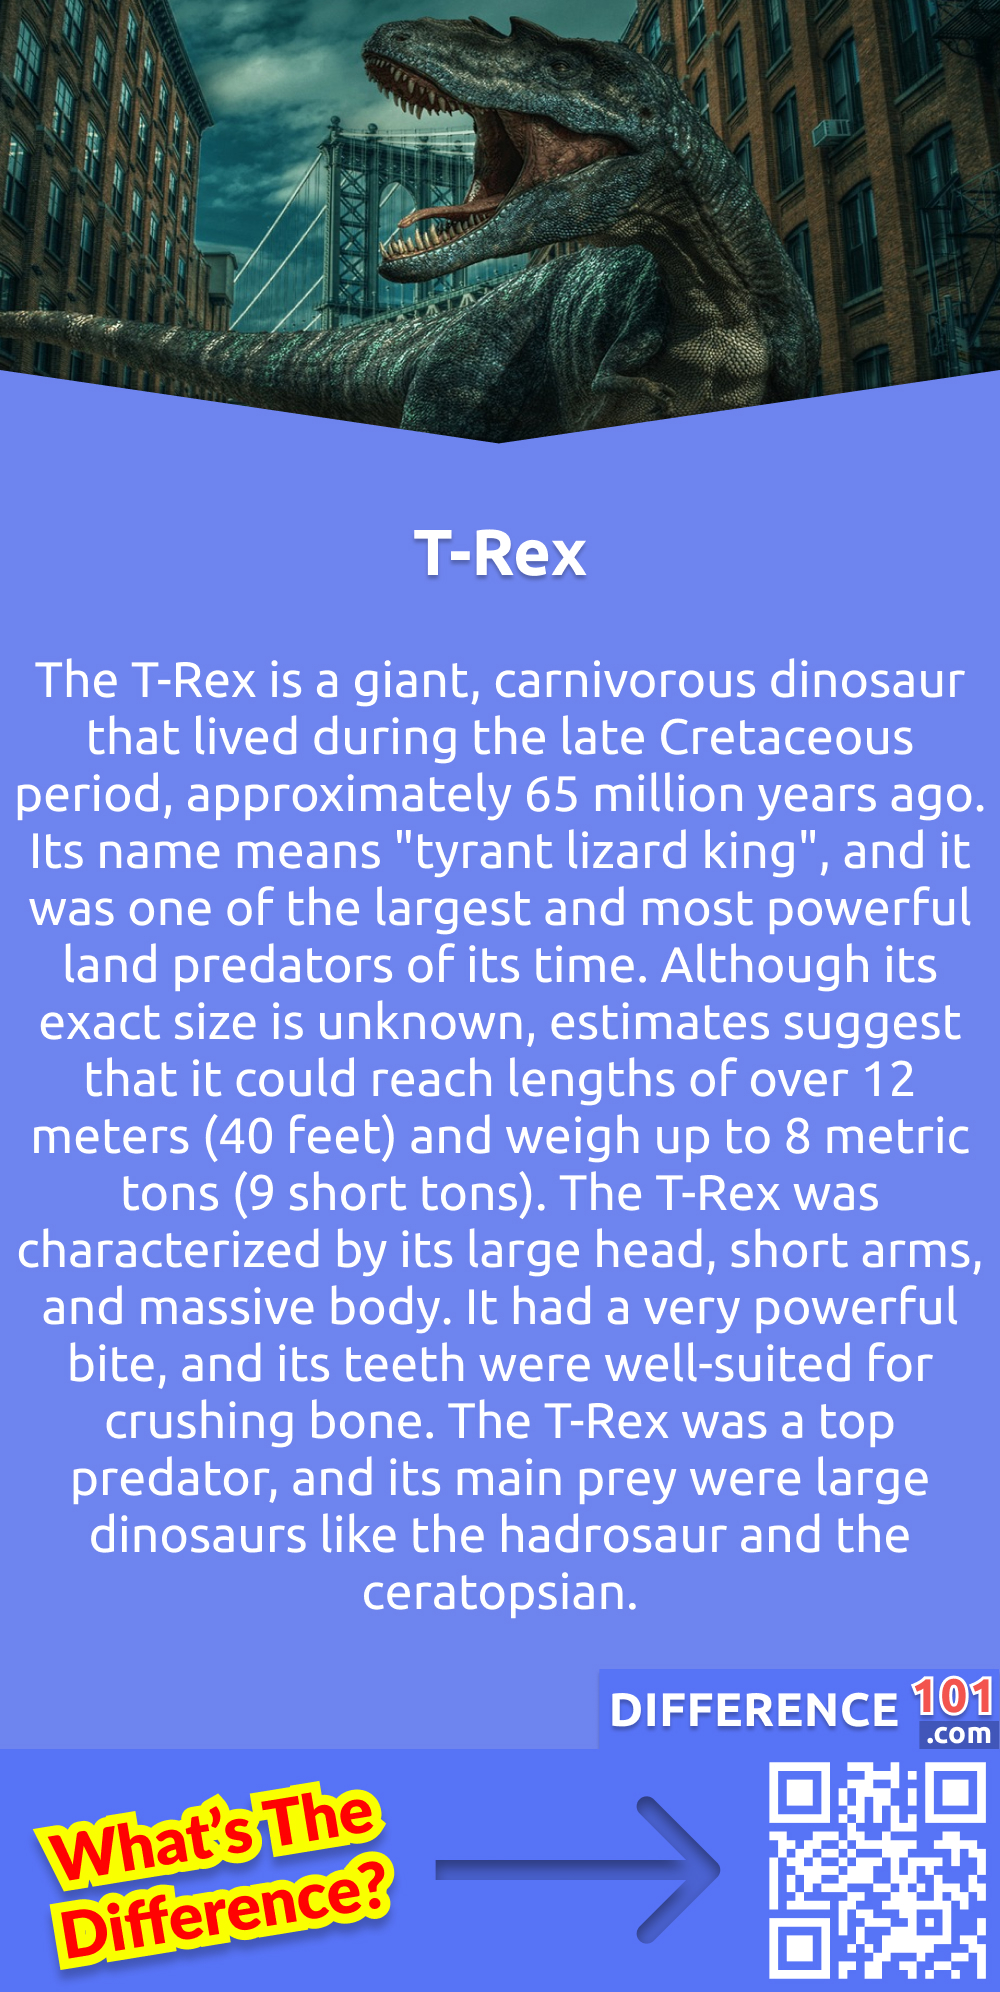 What Is T-Rex? The T-Rex is a giant, carnivorous dinosaur that lived during the late Cretaceous period, approximately 65 million years ago. Its name means "tyrant lizard king", and it was one of the largest and most powerful land predators of its time. Although its exact size is unknown, estimates suggest that it could reach lengths of over 12 meters (40 feet) and weigh up to 8 metric tons (9 short tons). The T-Rex was characterized by its large head, short arms, and massive body. It had a very powerful bite, and its teeth were well-suited for crushing bone. The T-Rex was a top predator, and its main prey were large dinosaurs like the hadrosaur and the ceratopsian.